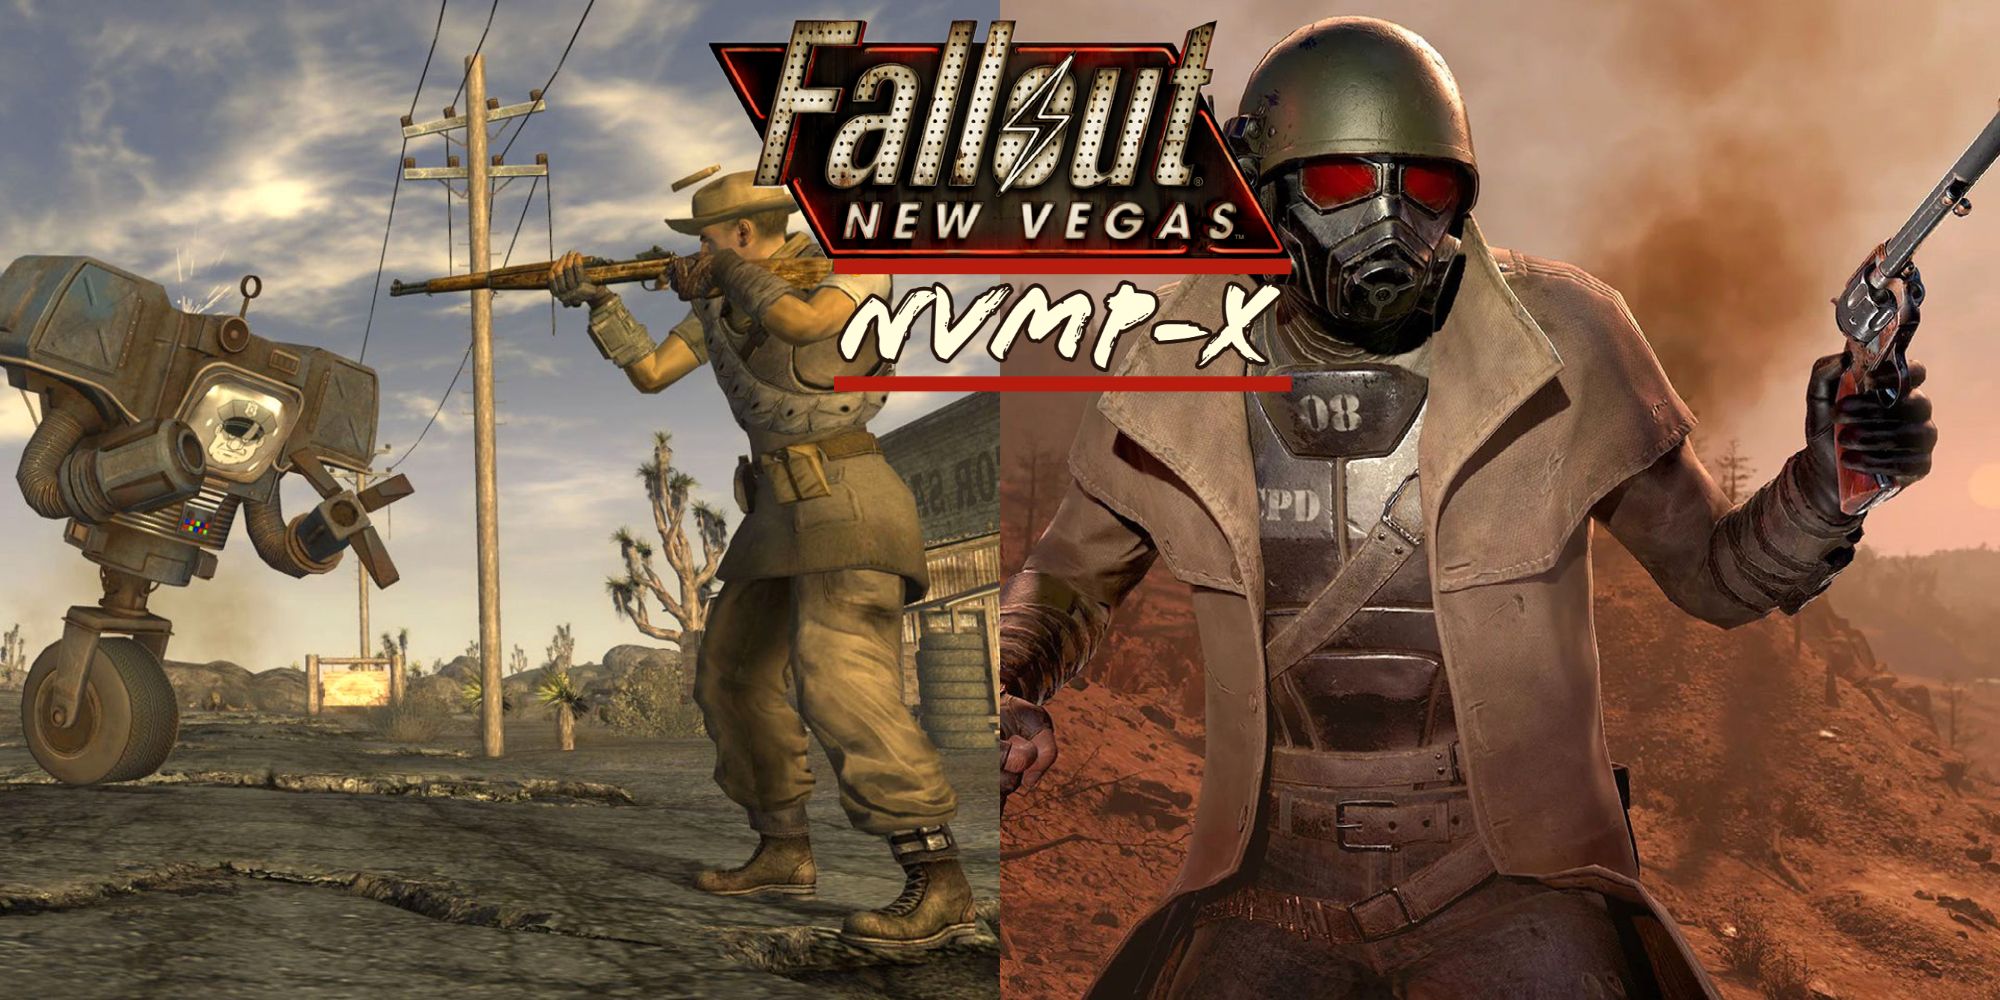 How To Install And Use Fallout New Vegas Multiplayer Mod